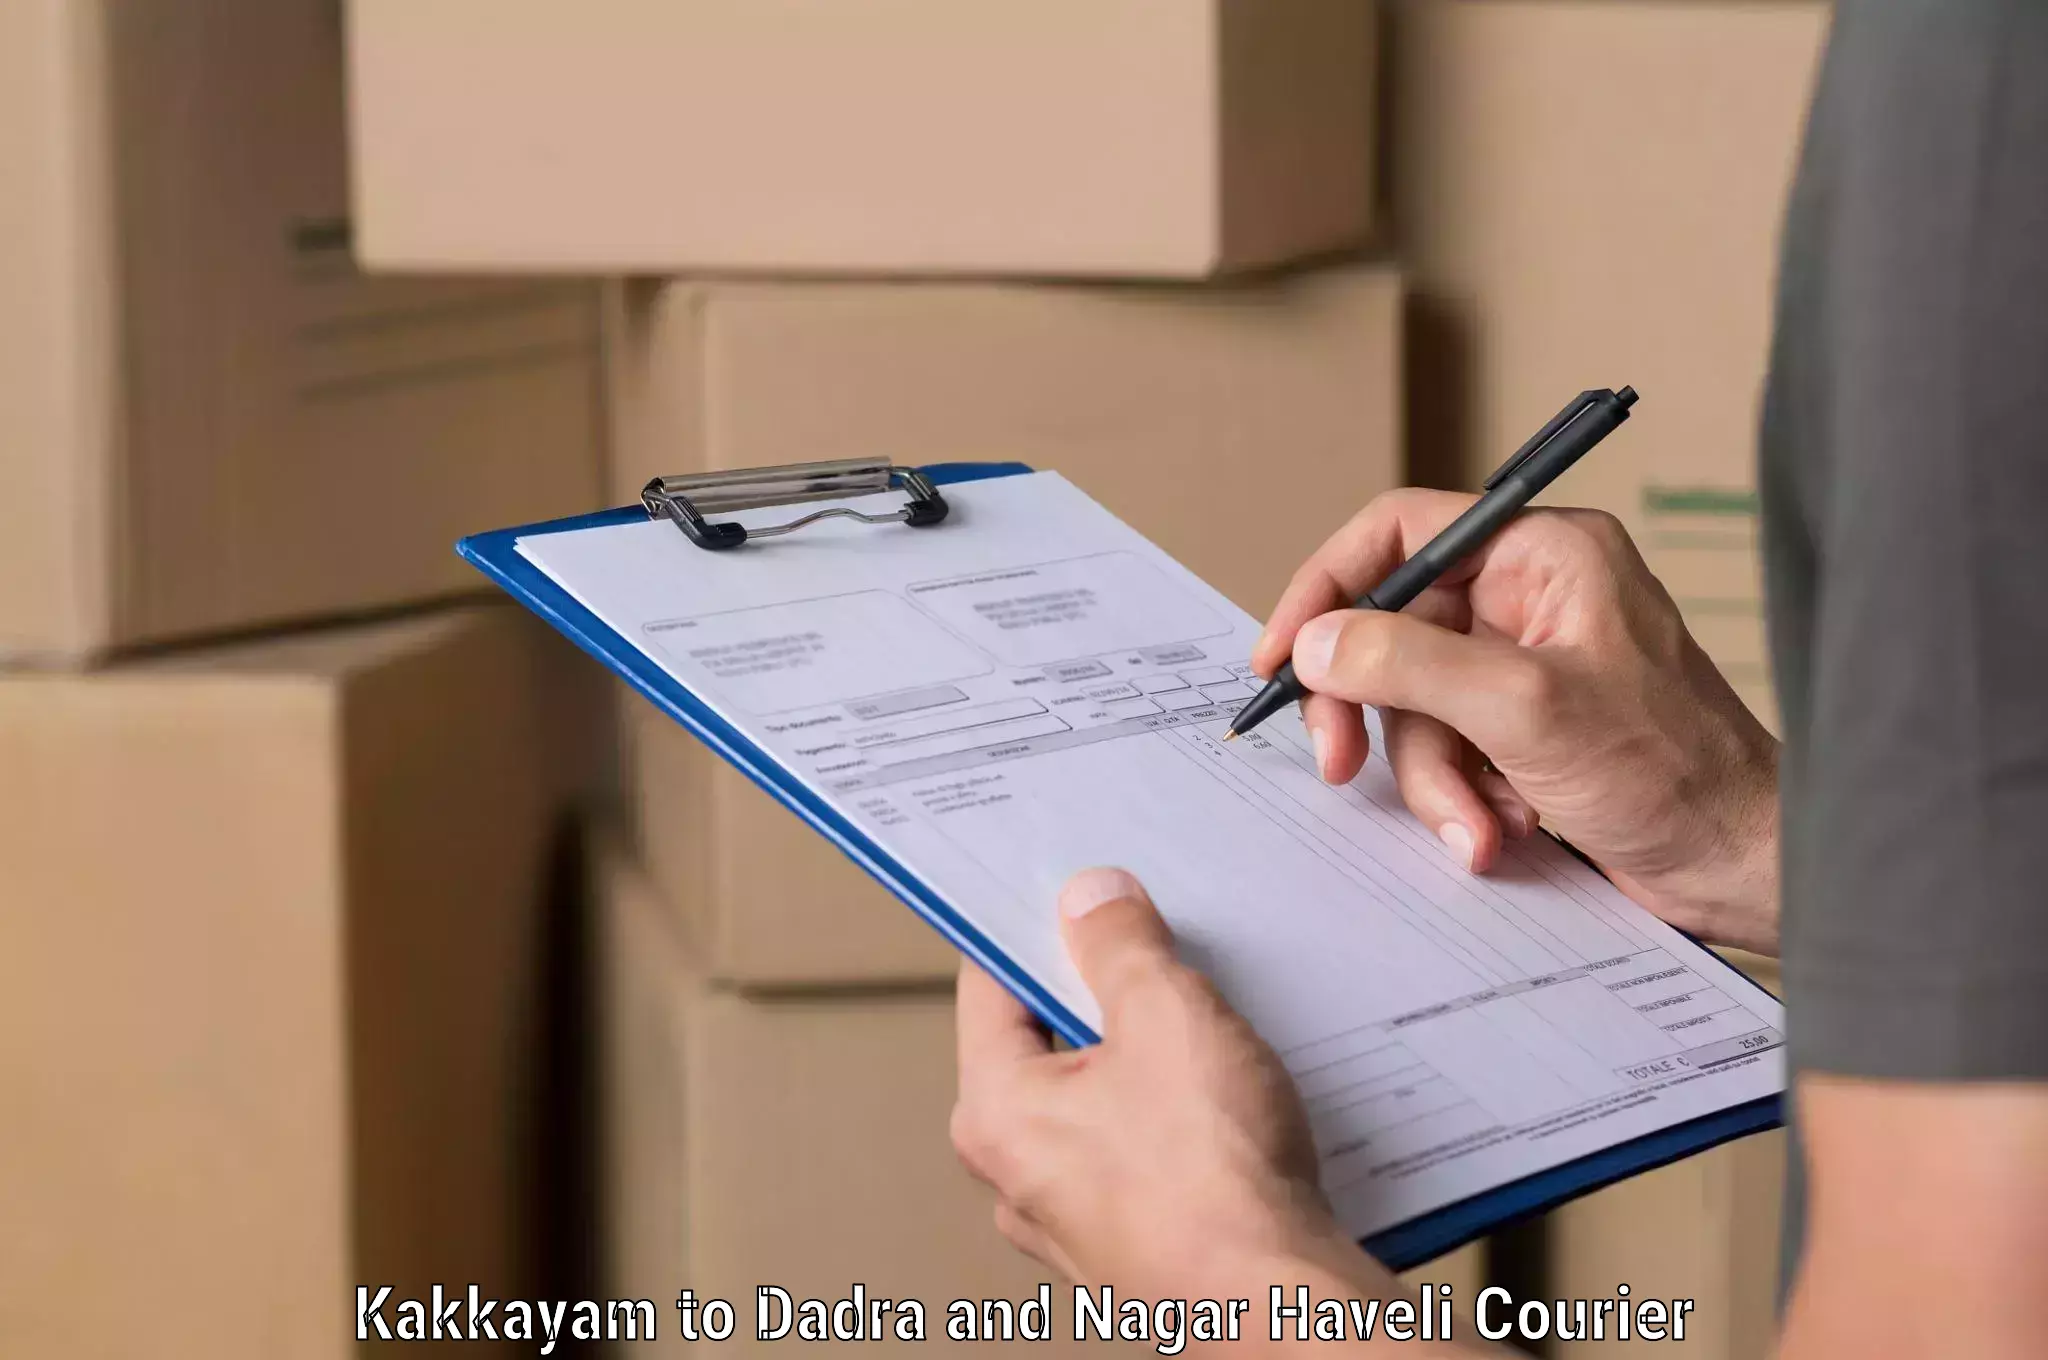 Easy access courier services Kakkayam to Dadra and Nagar Haveli